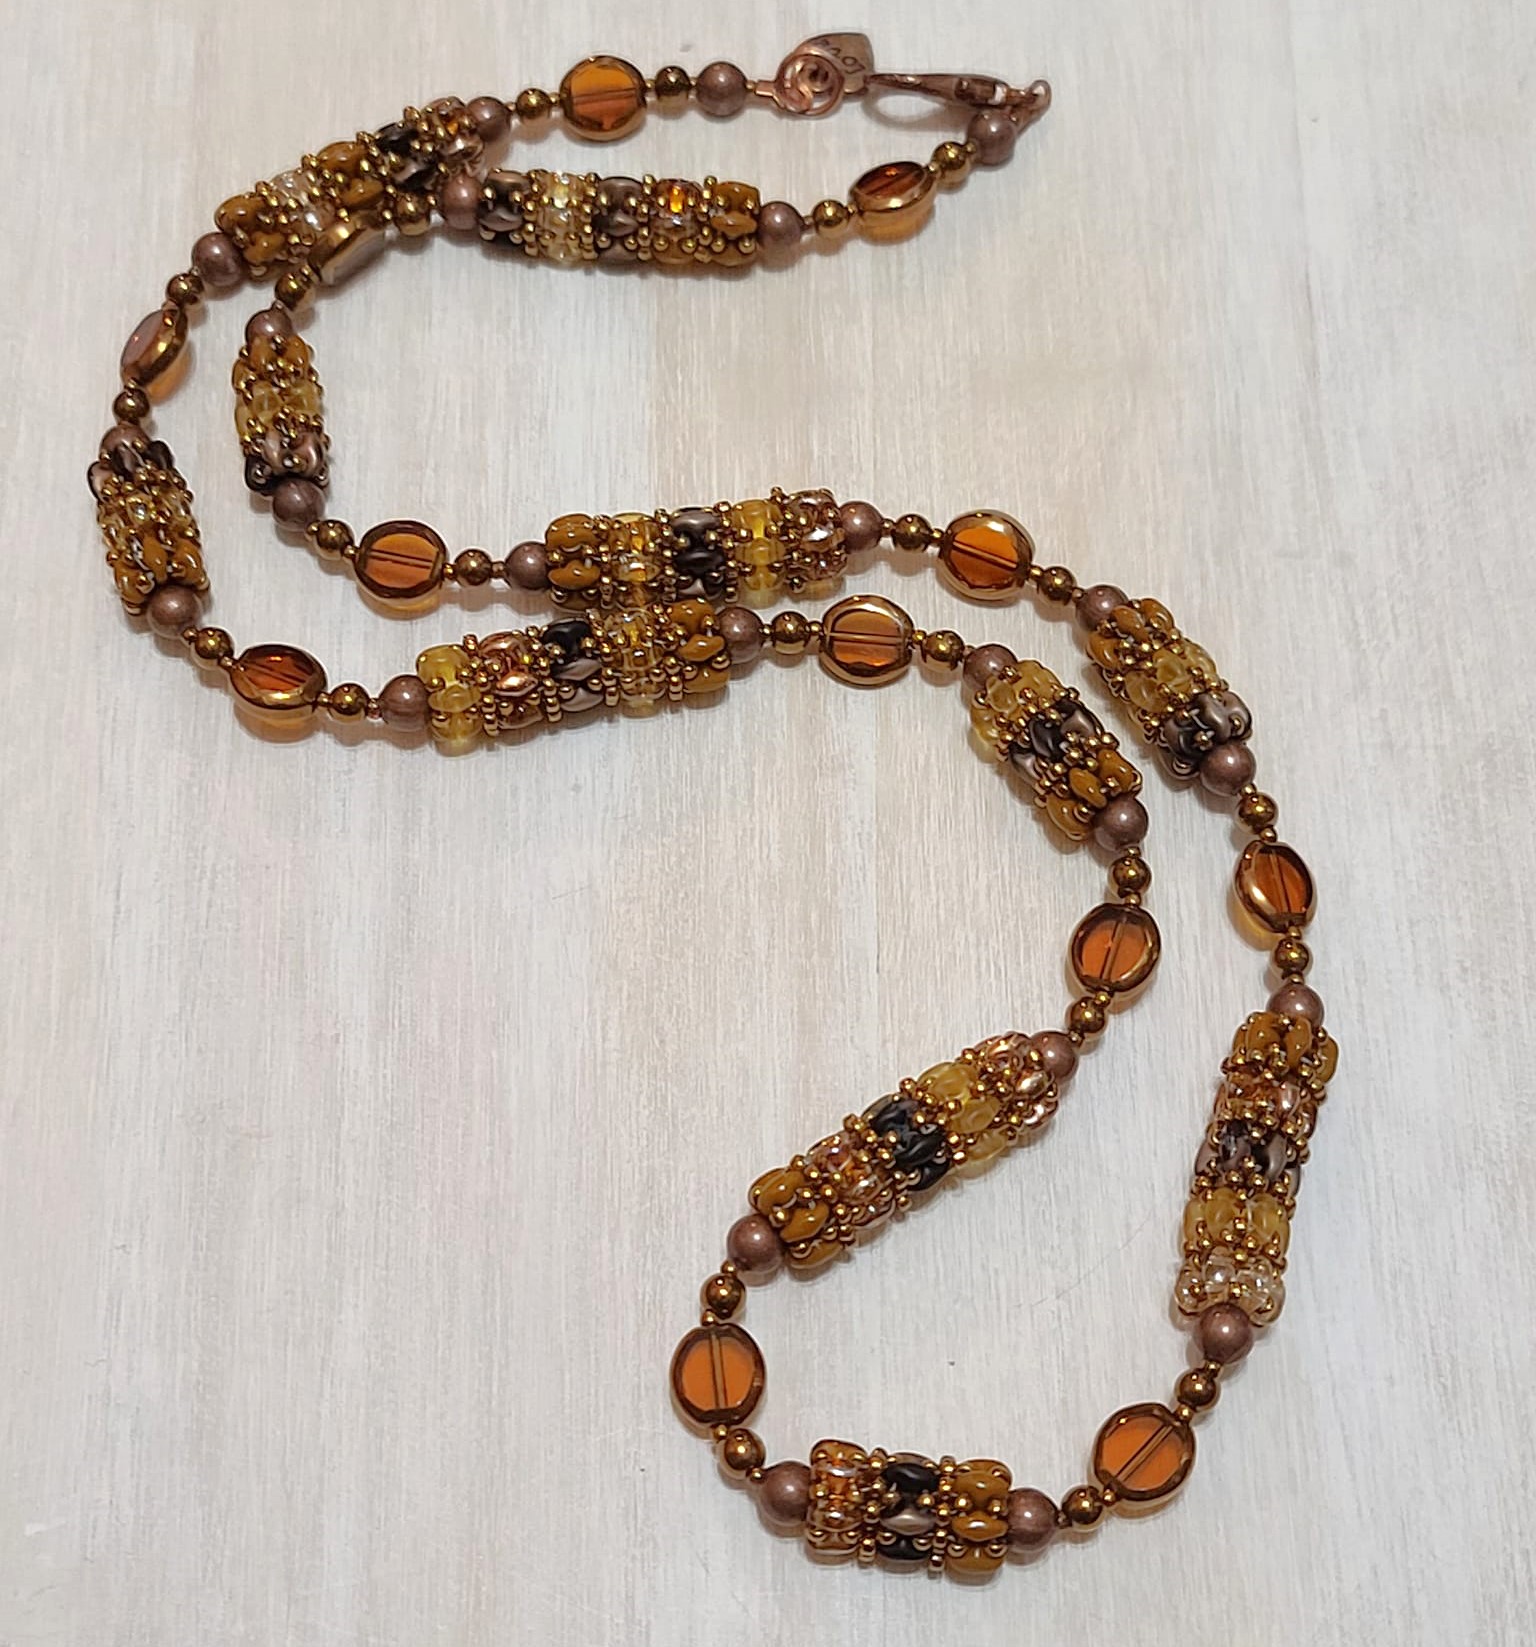 Handcrafted beaded necklace, glass super duos, crystals